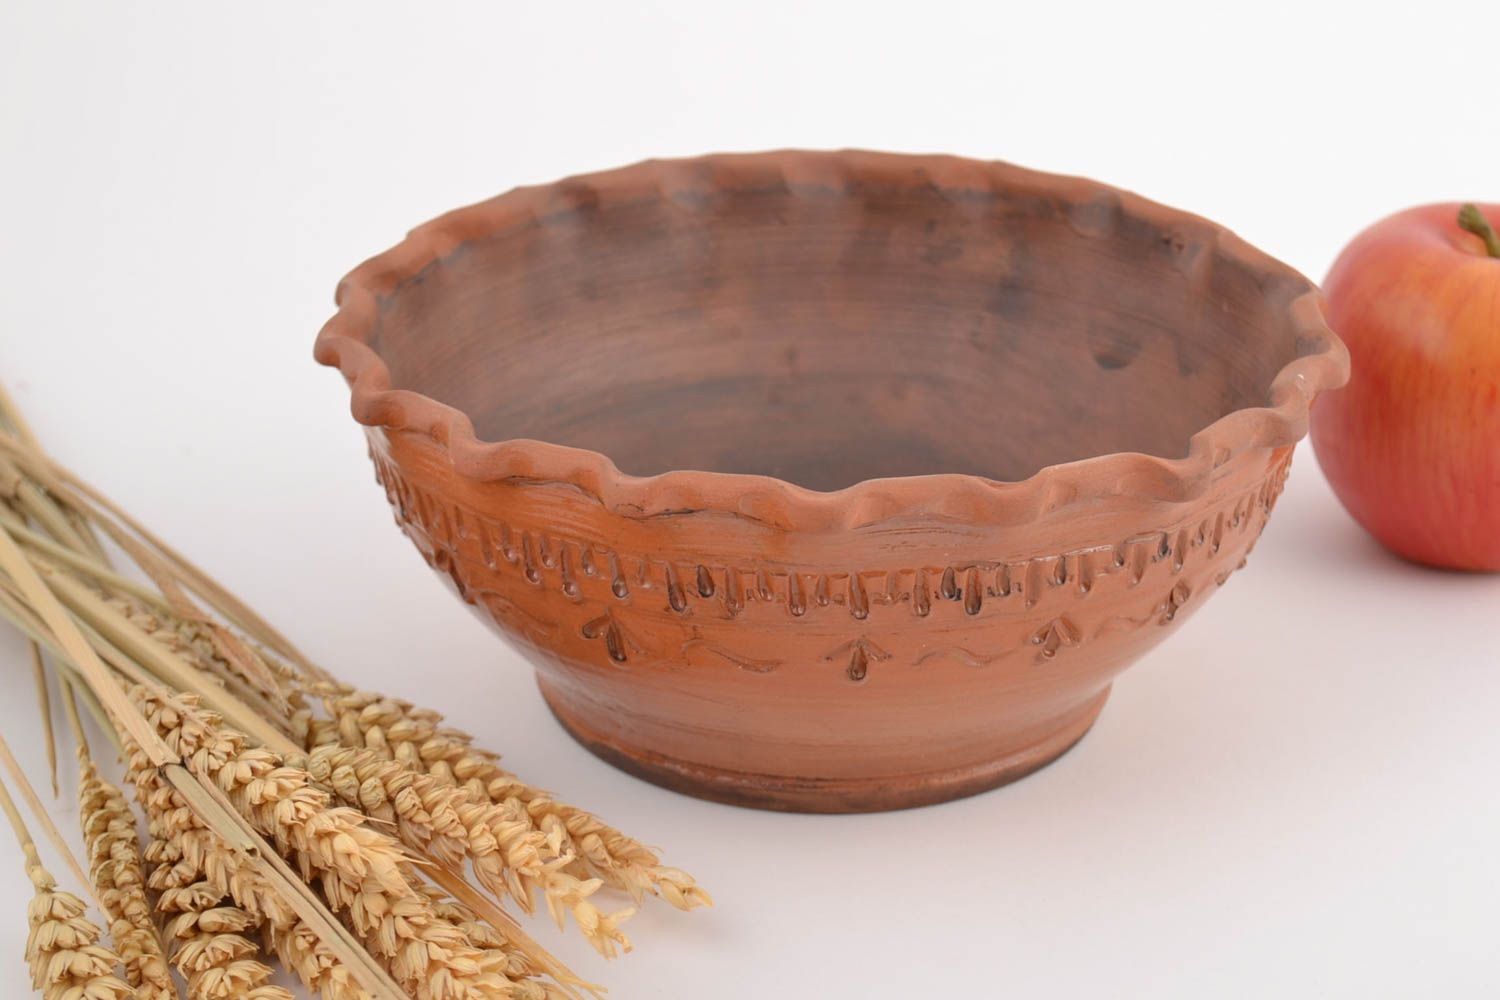 Large homemade clay bowl of brown color 1 l designer kitchenware photo 1